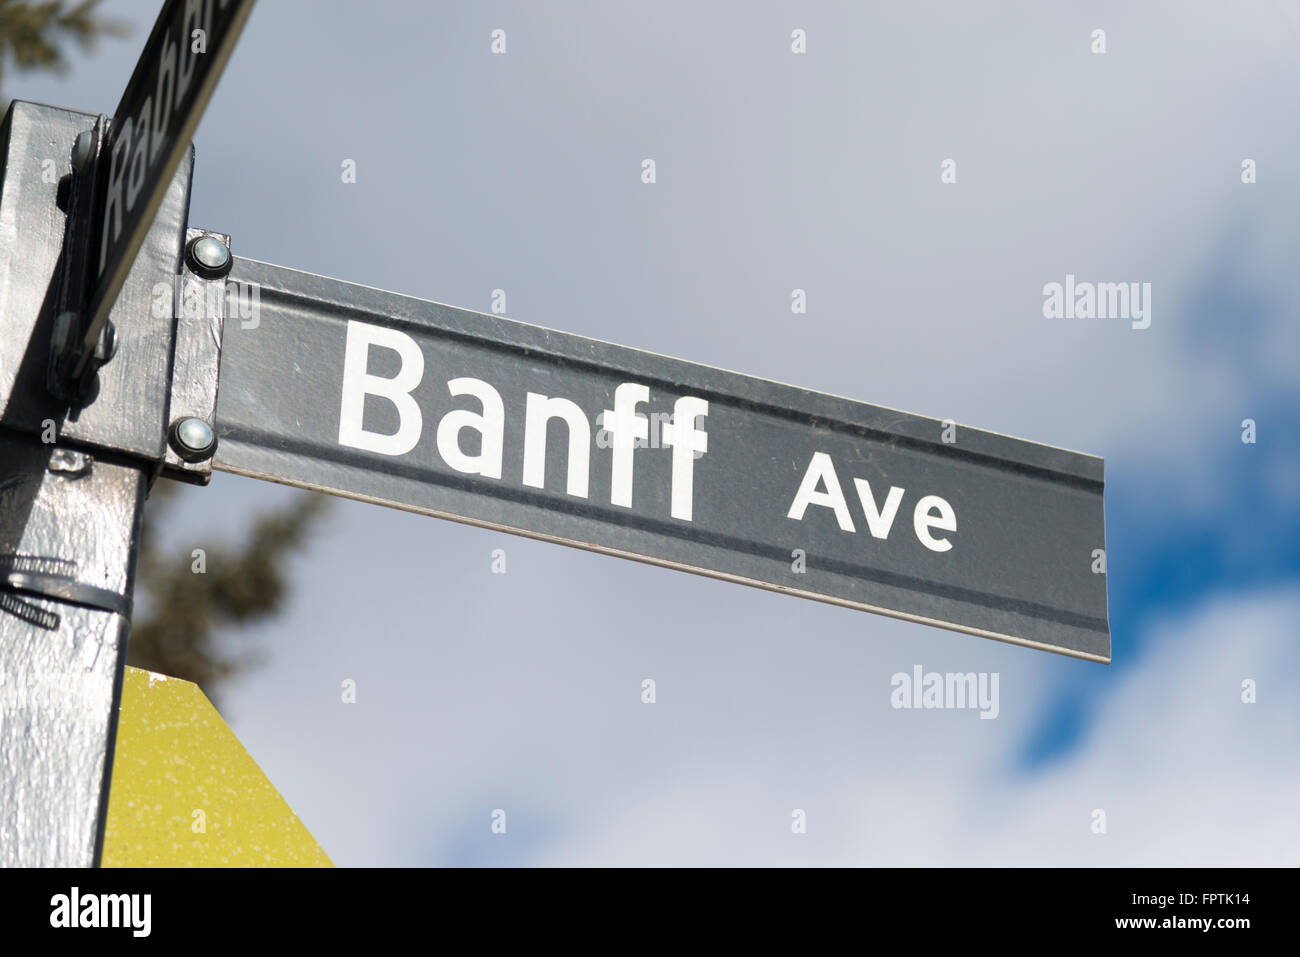 A street sign giving directions to Banff Avenue Banff Canada Stock Photo